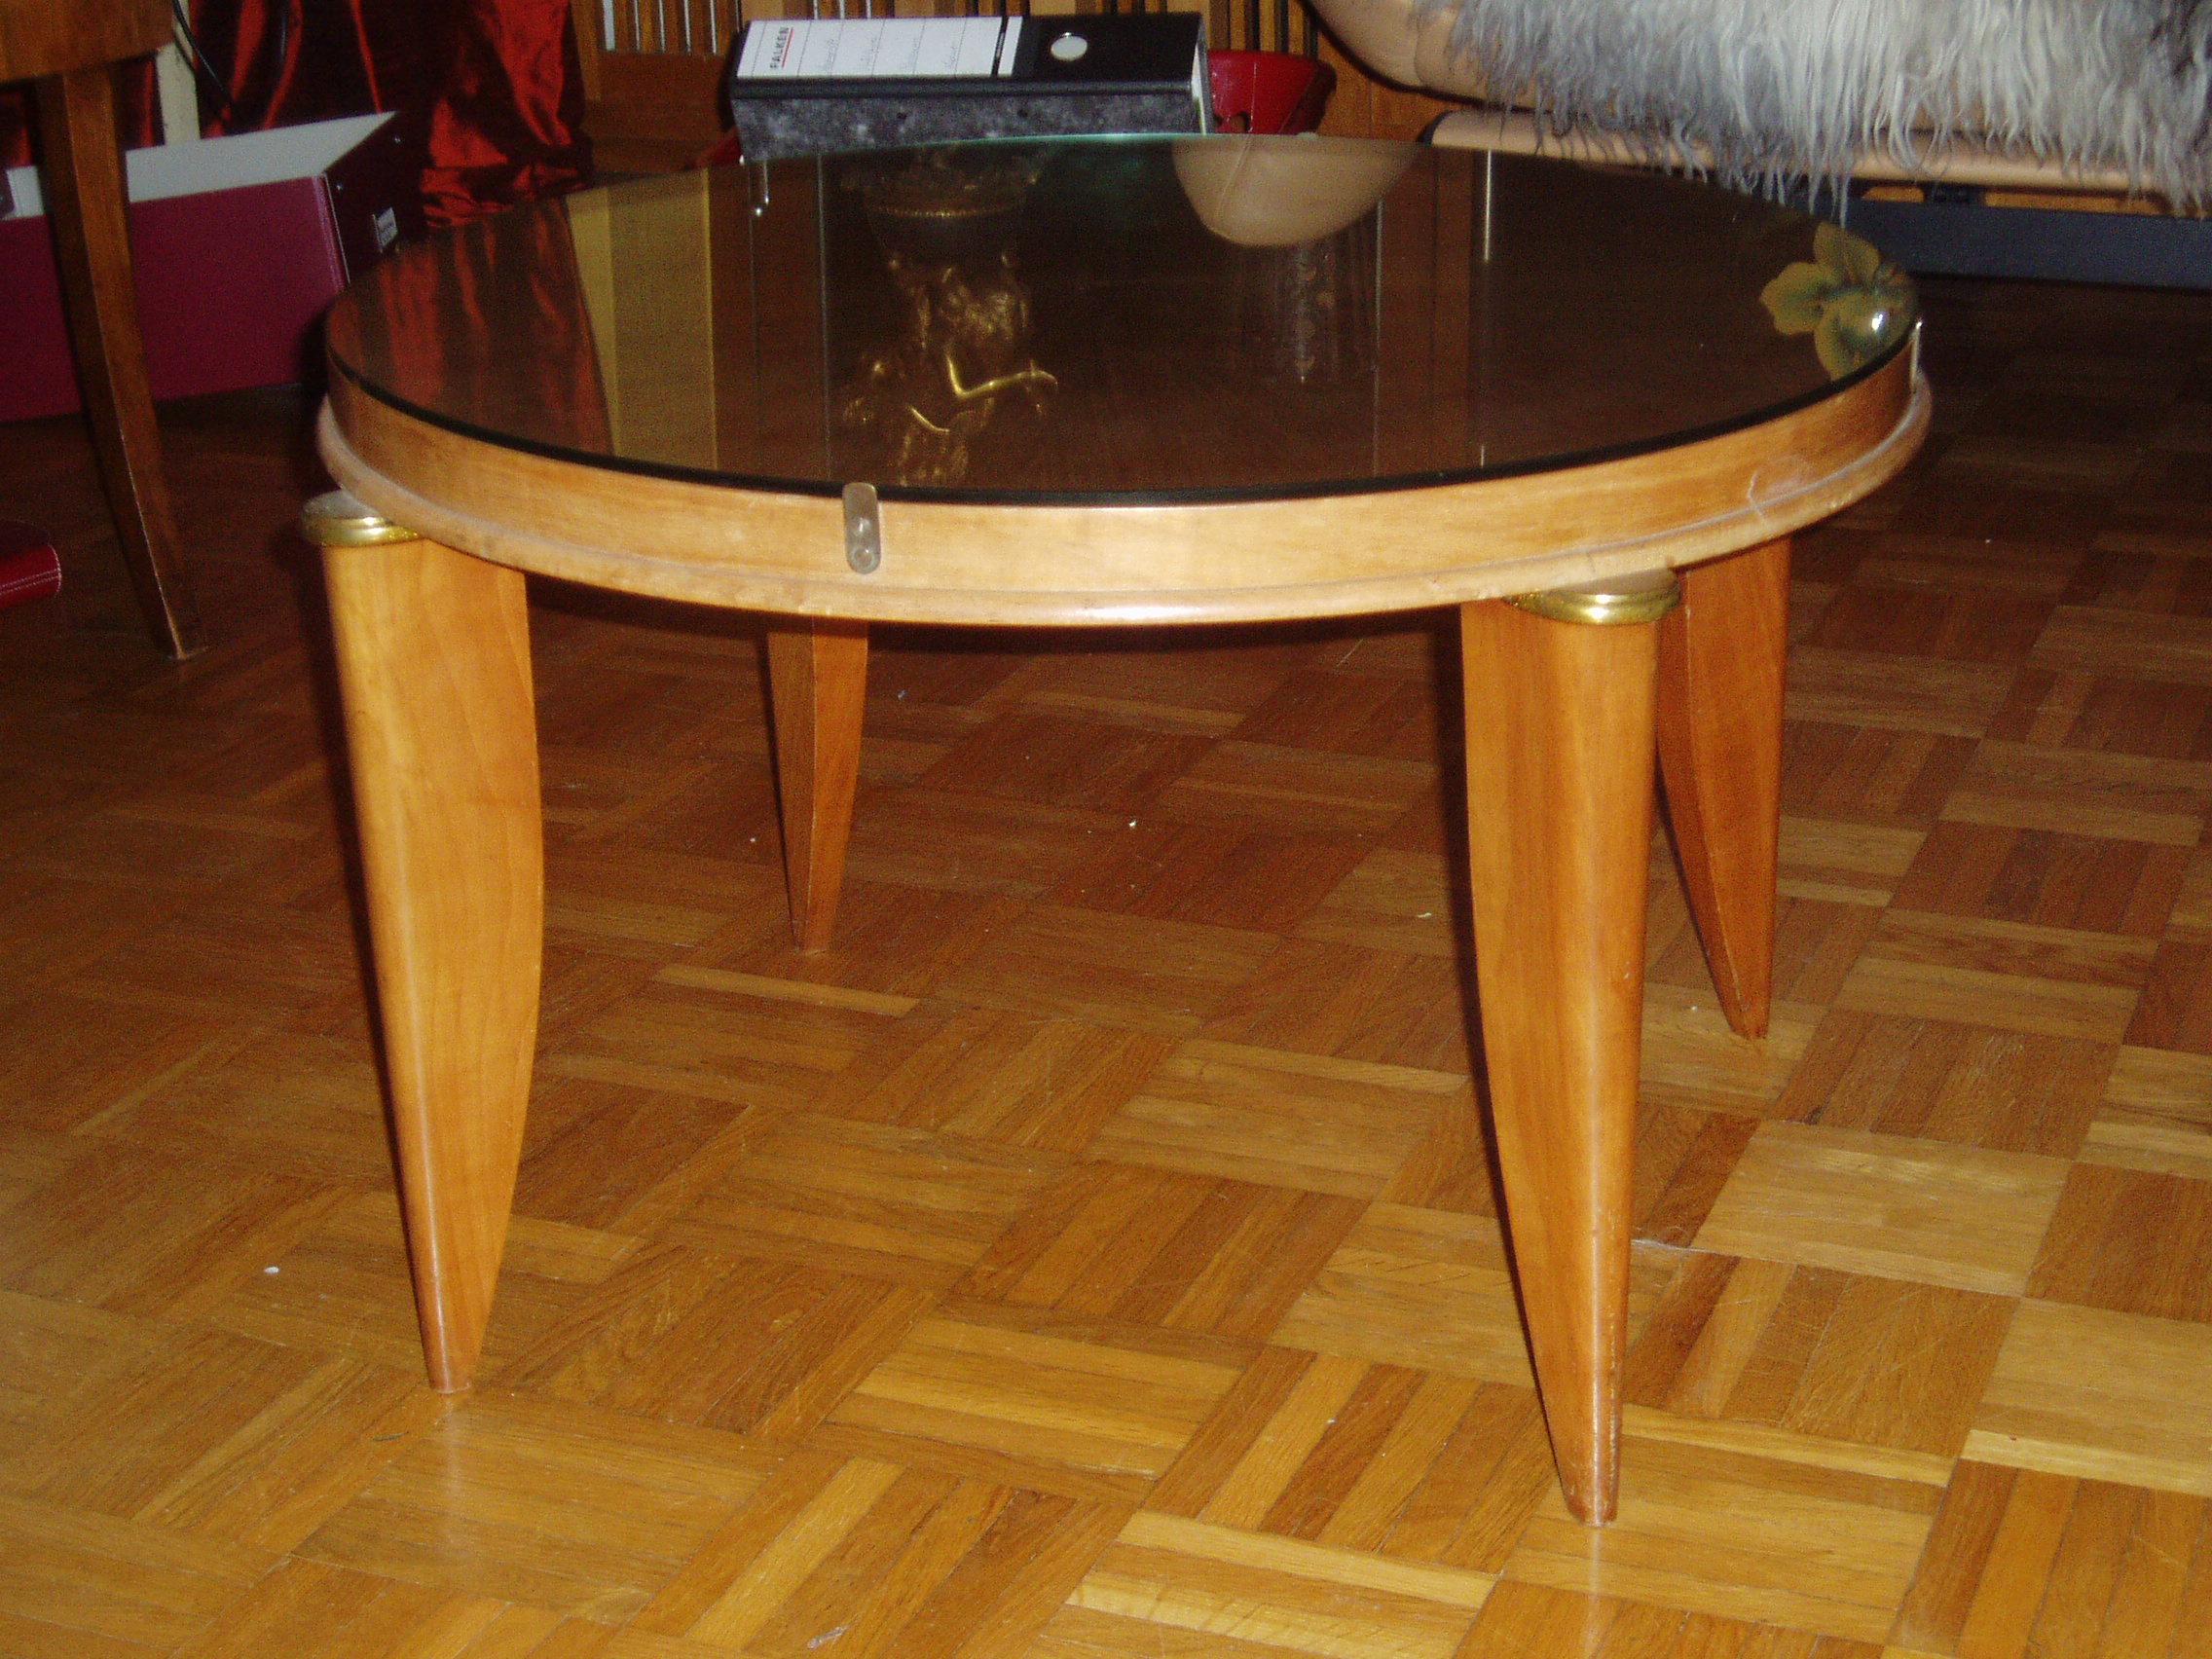 Elegant french Art Deco side table / coffee table by Maurice Jallot ( 1900 to 1971 )  of the late Art Deco era. Circa 1940. The table is well documented. Very solid construction. Sycamore maple with brass finishes. With overlying glass top, fixed